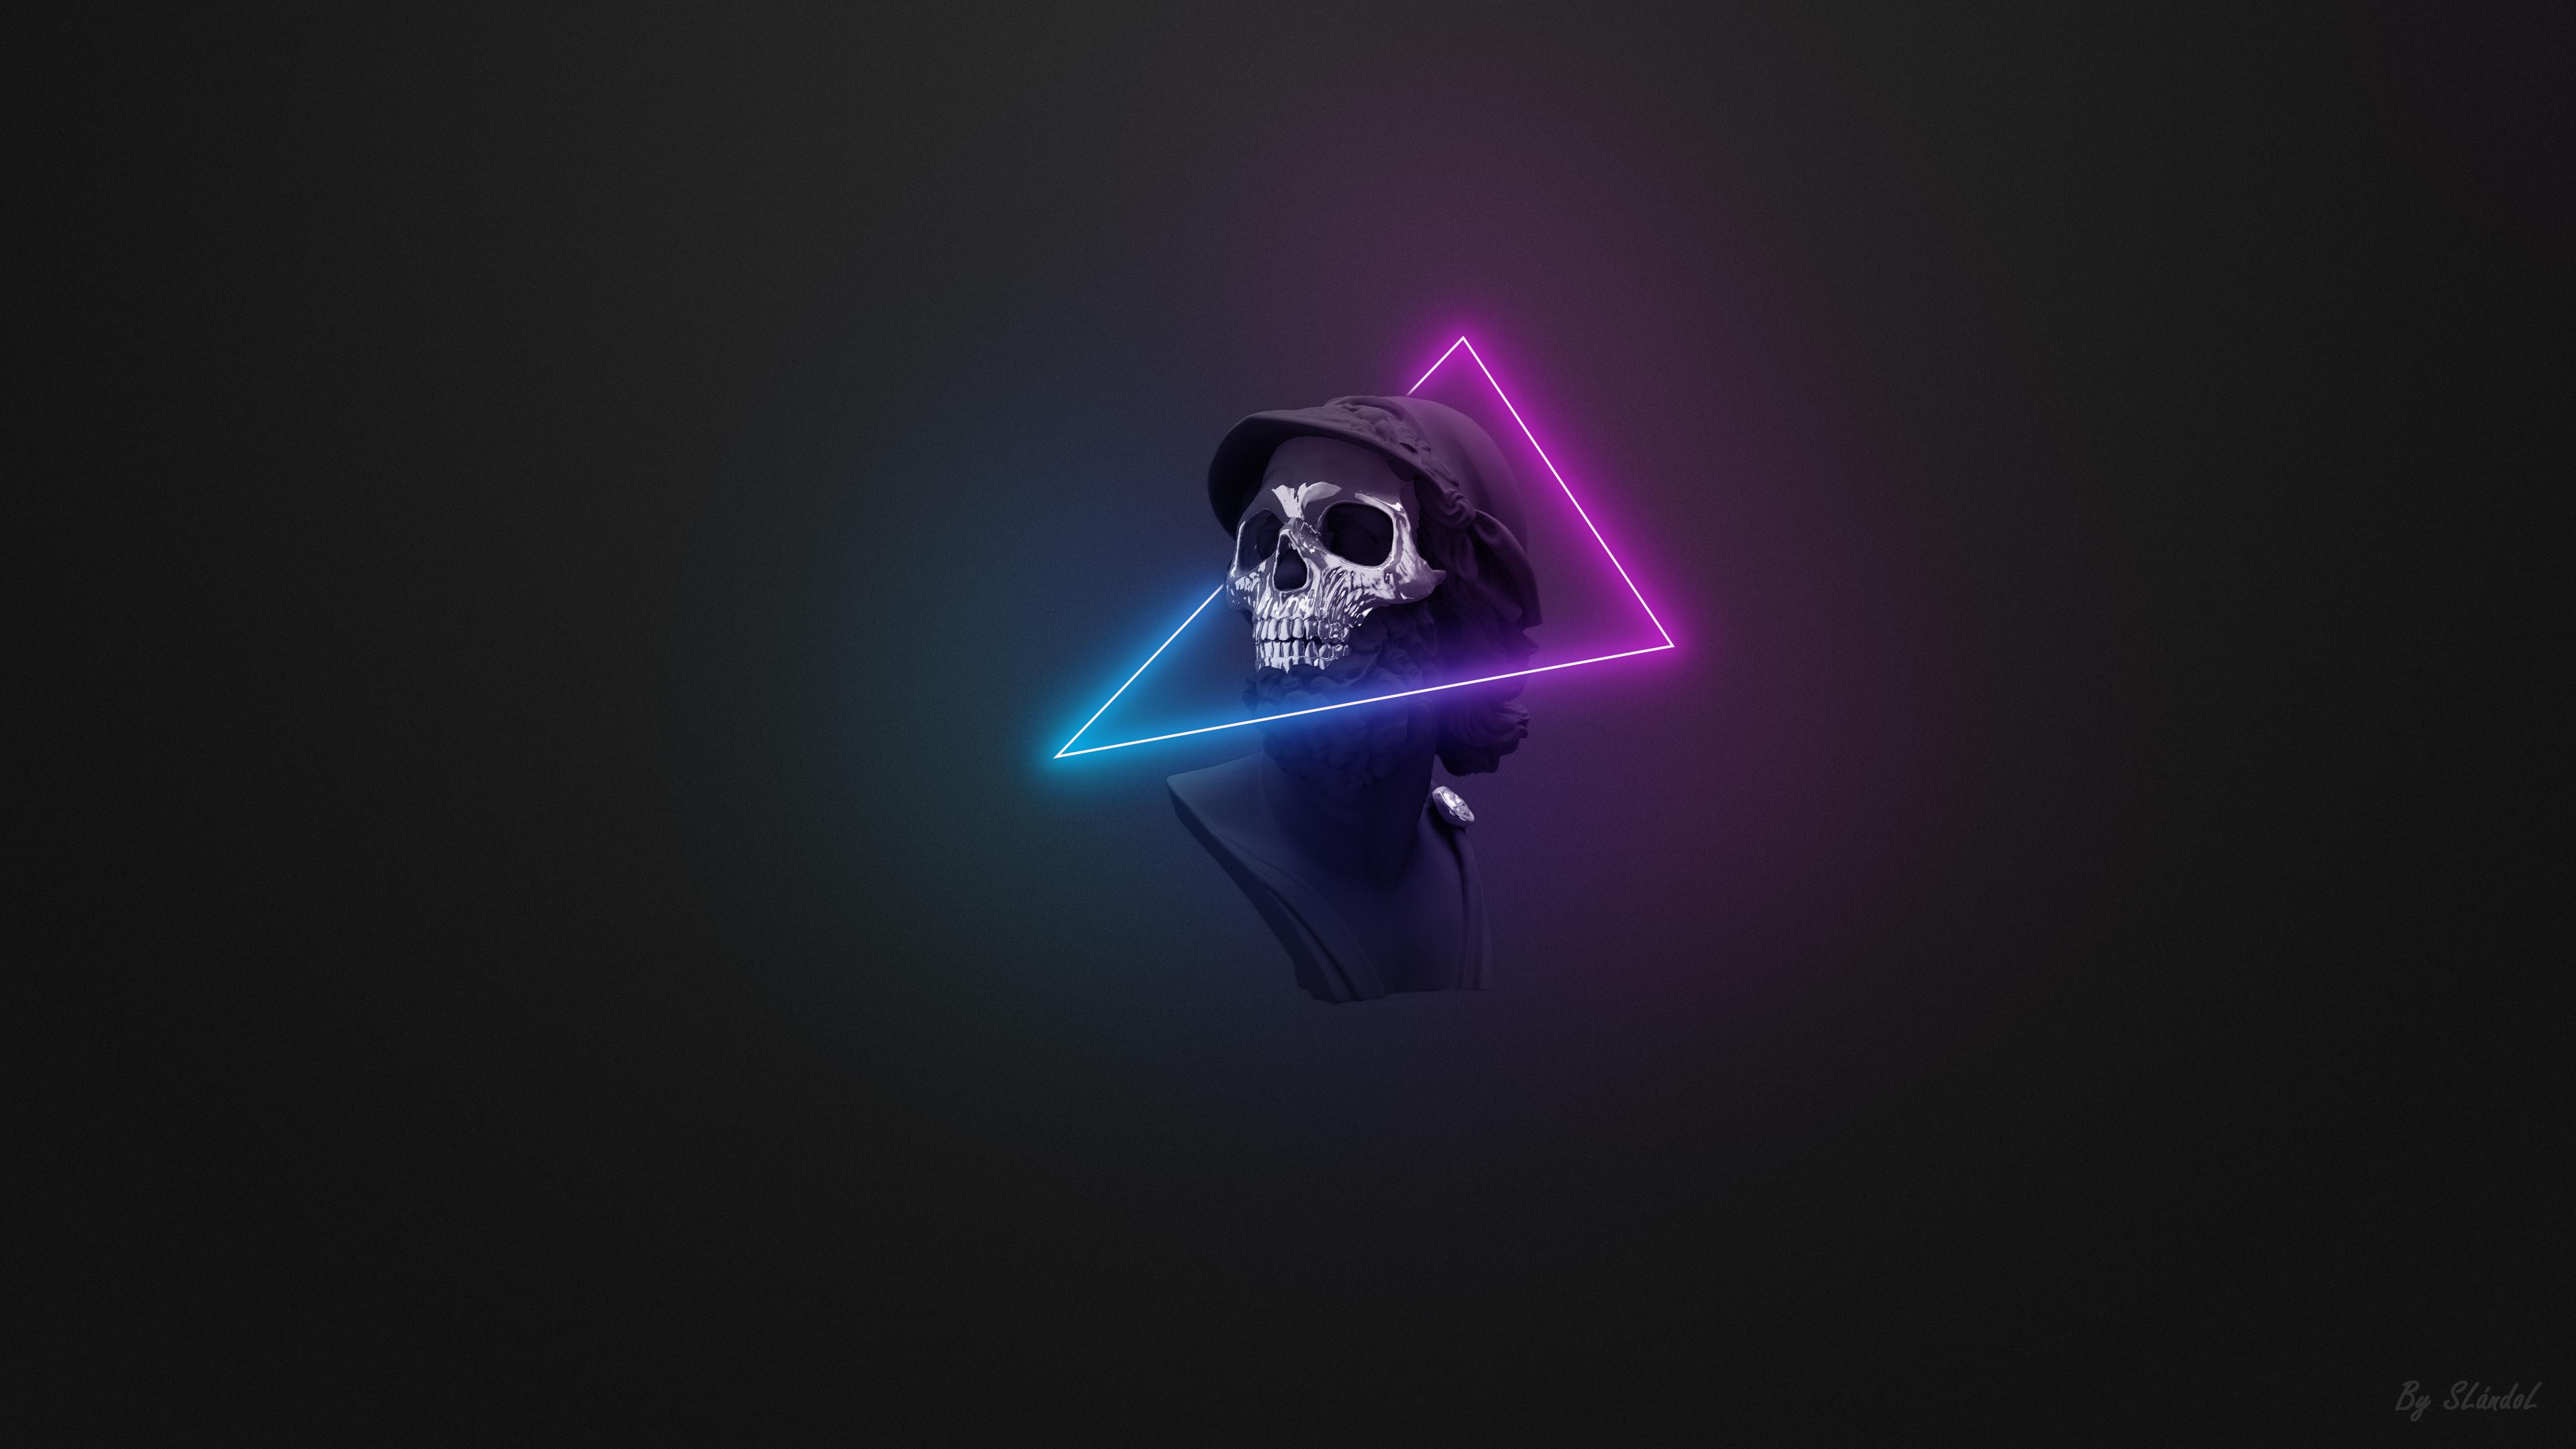 Bust 4K wallpaper for your desktop or mobile screen free and easy to download